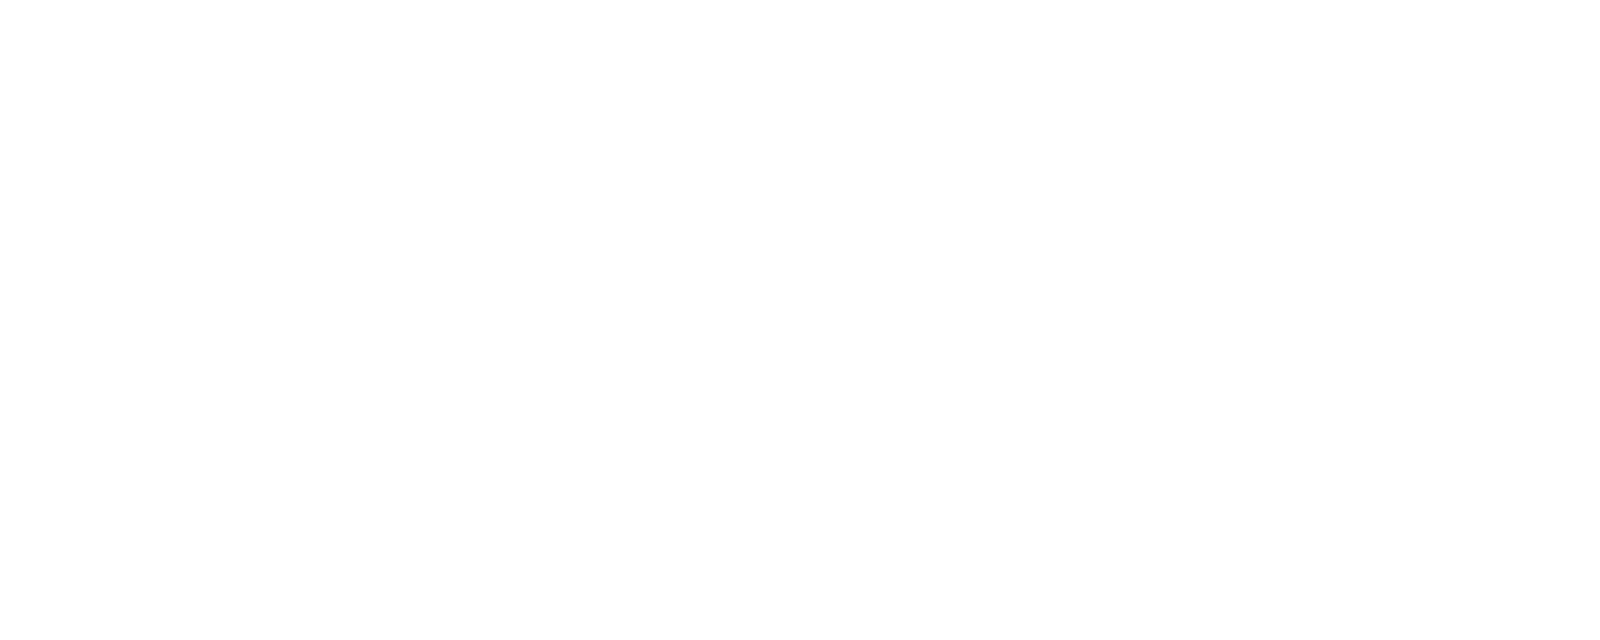 UP TO 25% OFF DURING THE SUMMER SALE